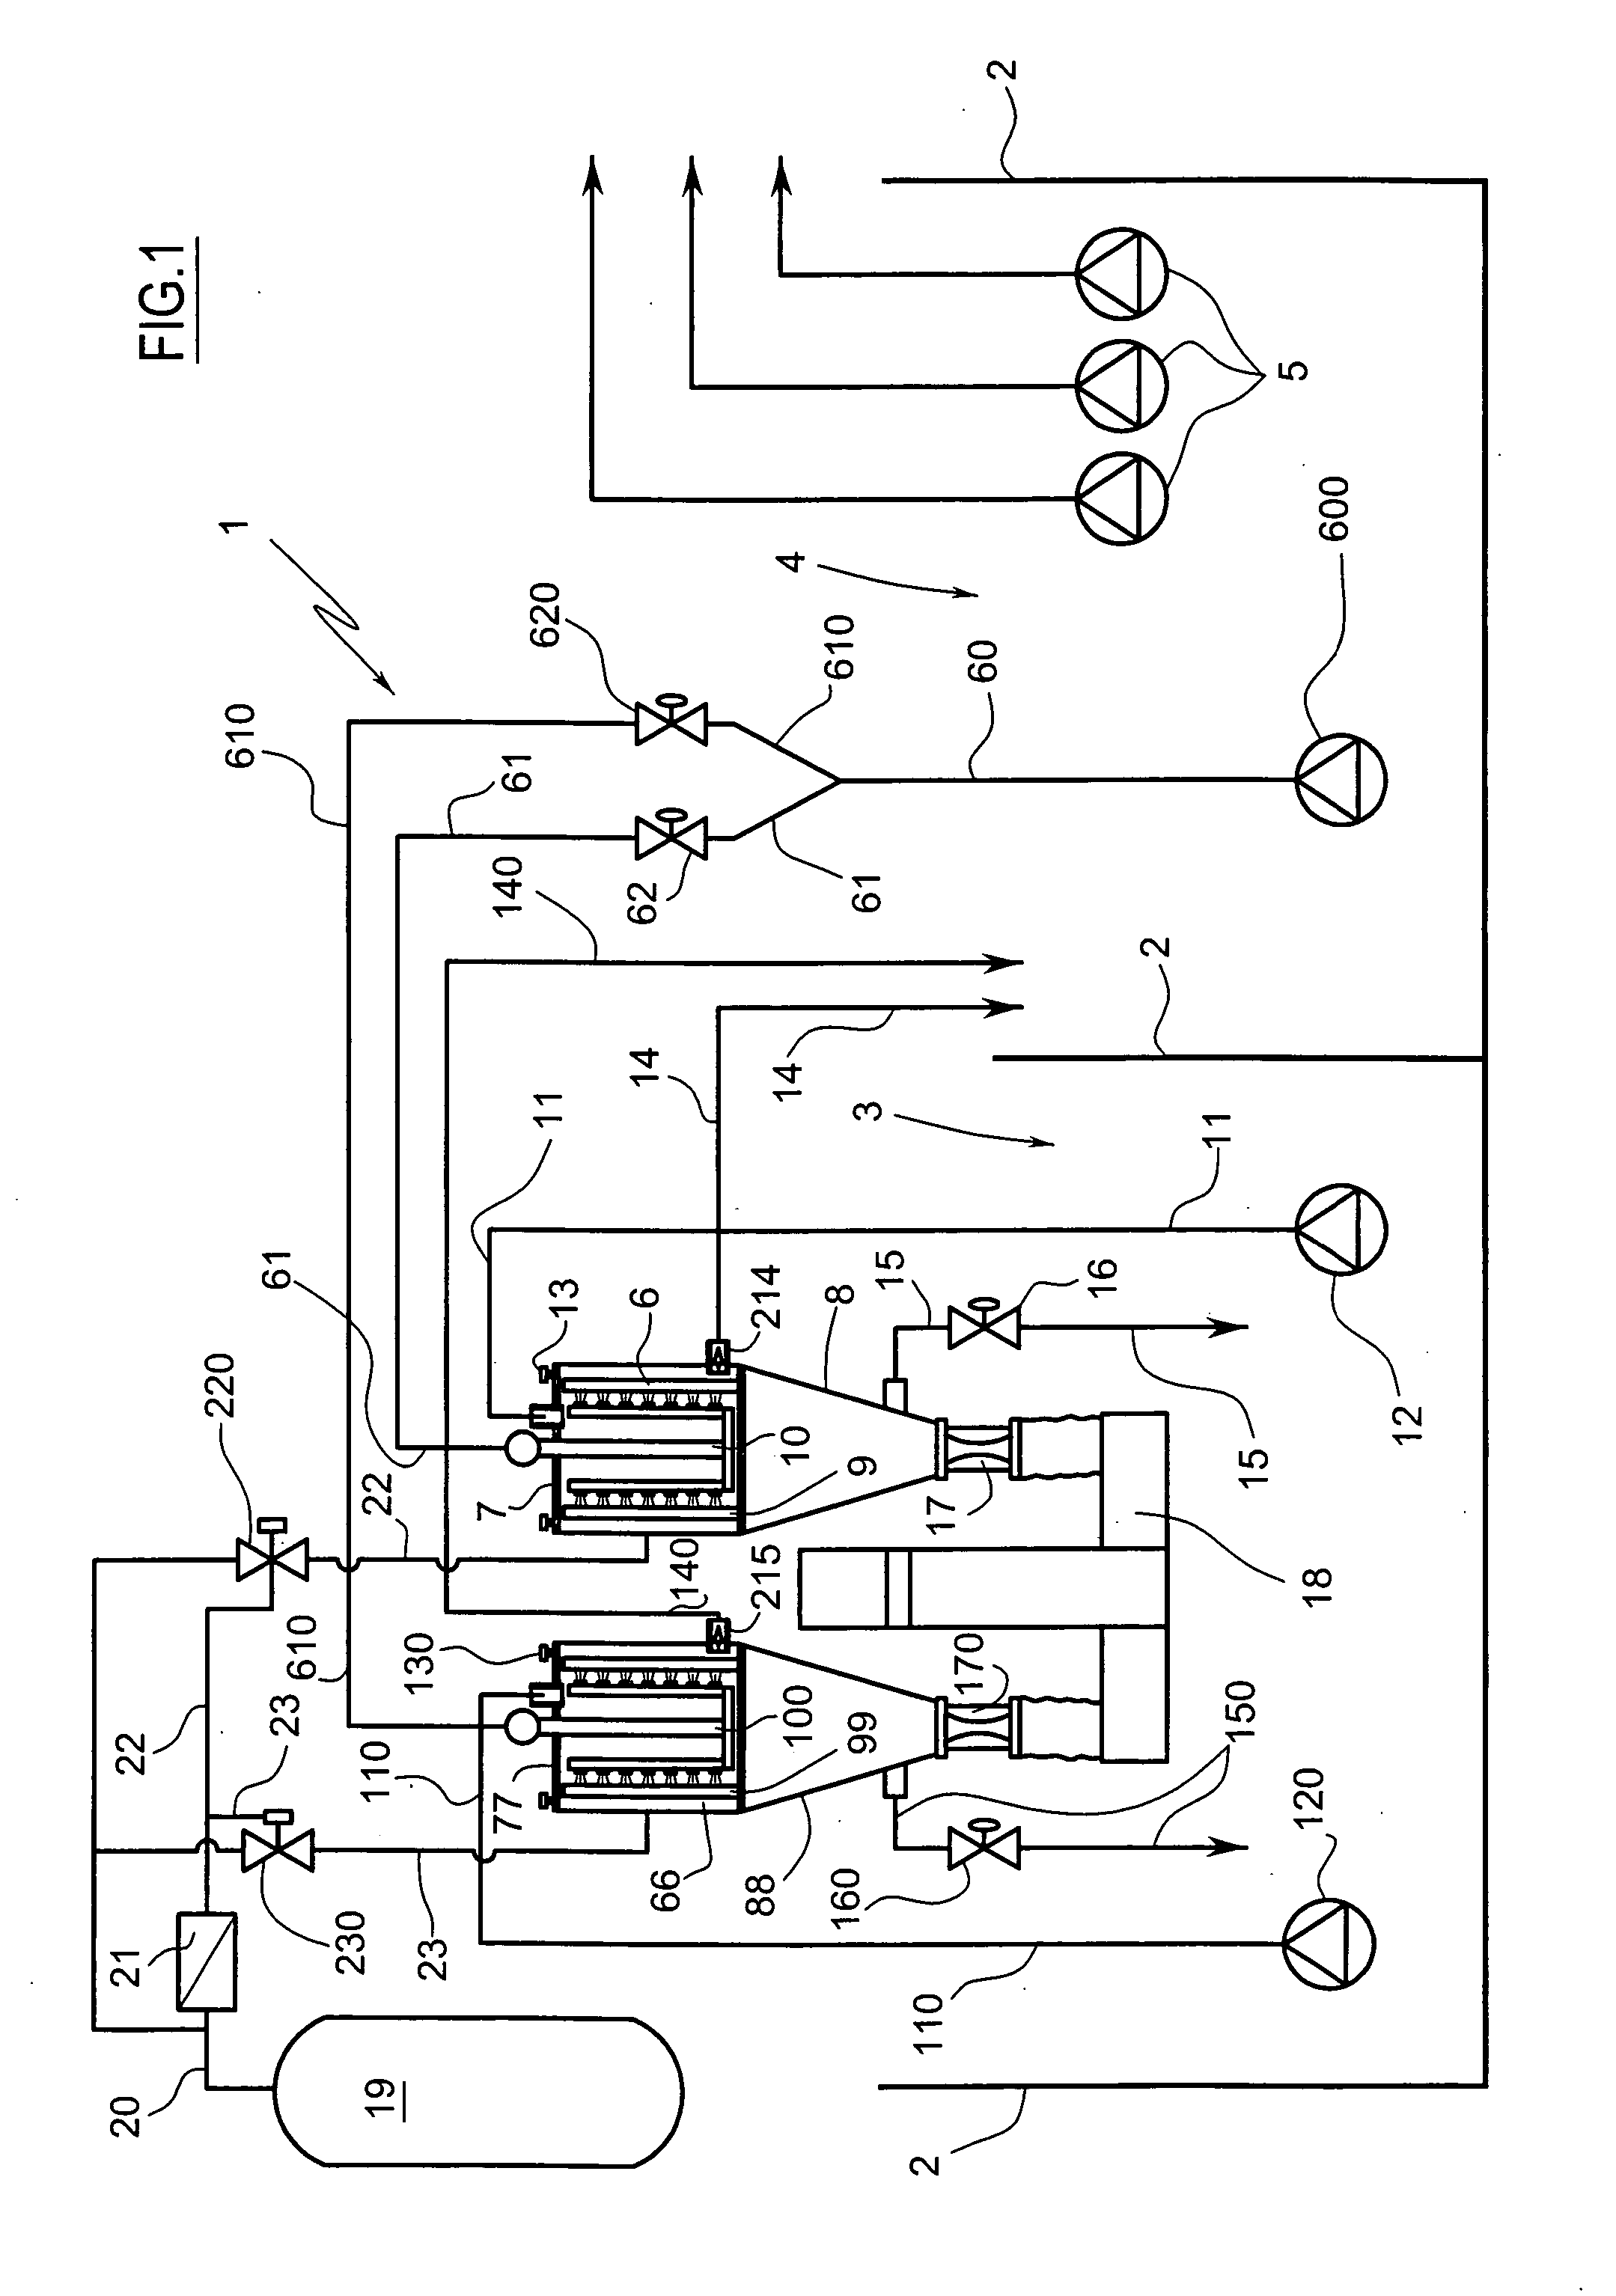 Plant and method for the treatment of the recovery cooling fluid in mechanical processing plants